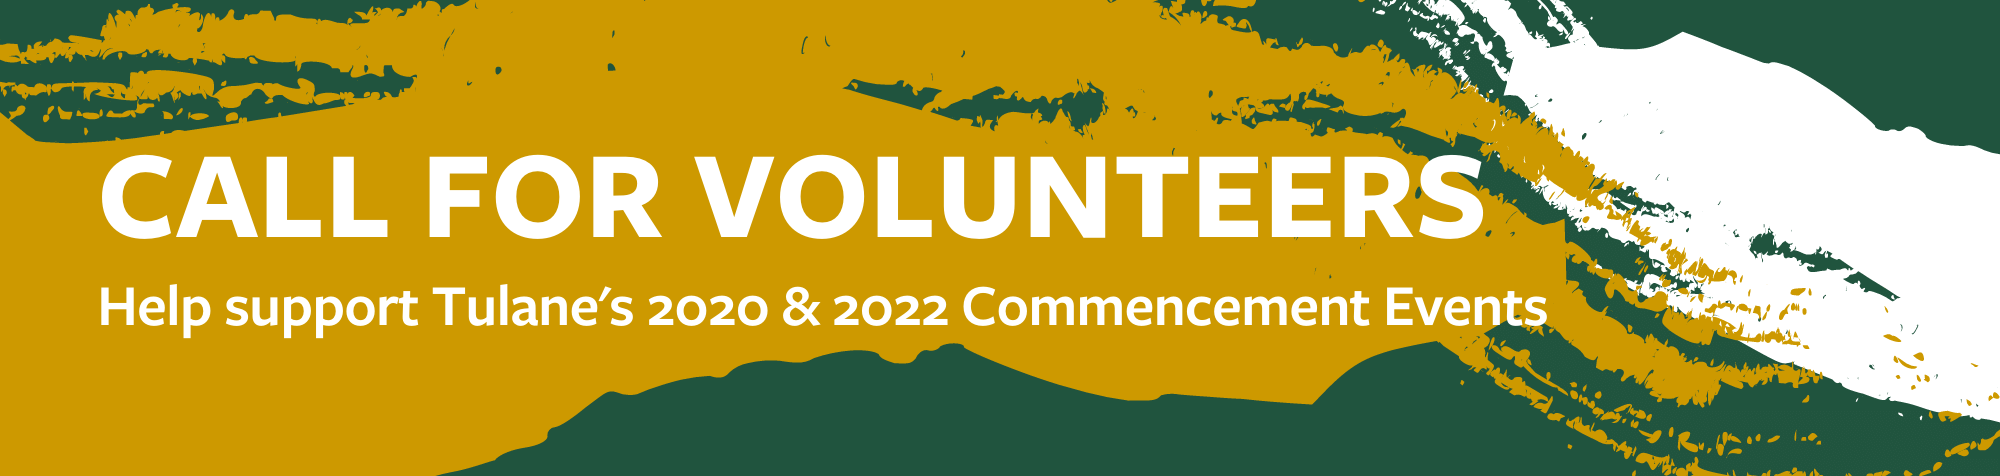 Call for Volunteers - 2020 and 2022 Tulane Commencement Events